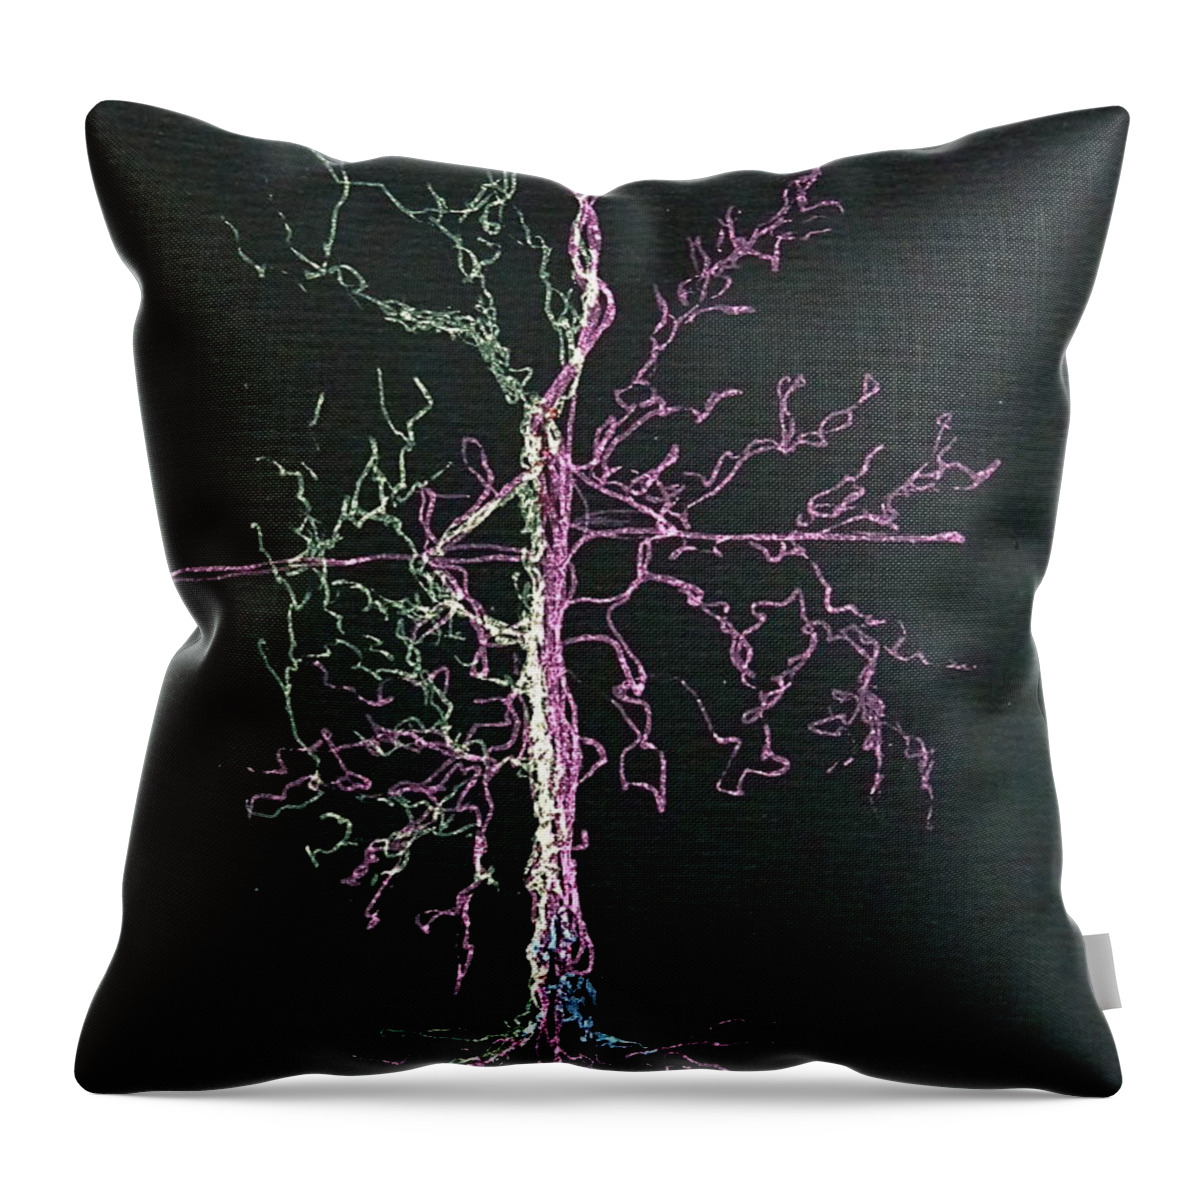 Bettye Harwell Art Throw Pillow featuring the drawing Branching Out by Bettye Harwell